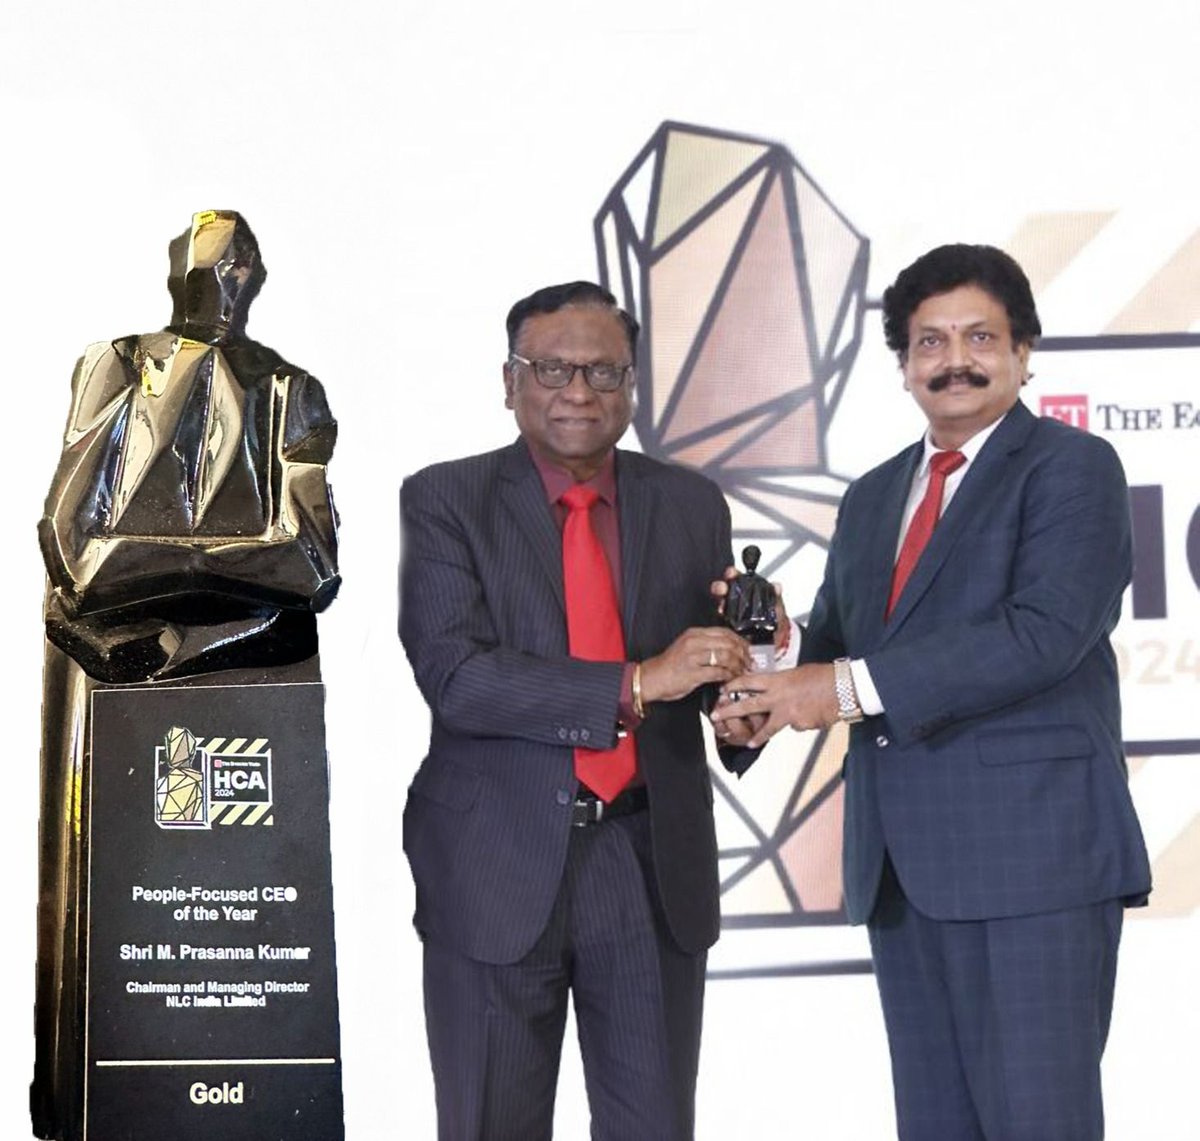 Esteemed industry leader Shri. Prasanna Kumar Motupalli, CMD, NLC India Limited, has been honored with the prestigious “People-Focused CEO of the Year” award by ET HR World, HR vertical of The Economic Times, at The Leela Ambience, Gurugram. #NLCIL @ETHrWorld @CoalMinistry